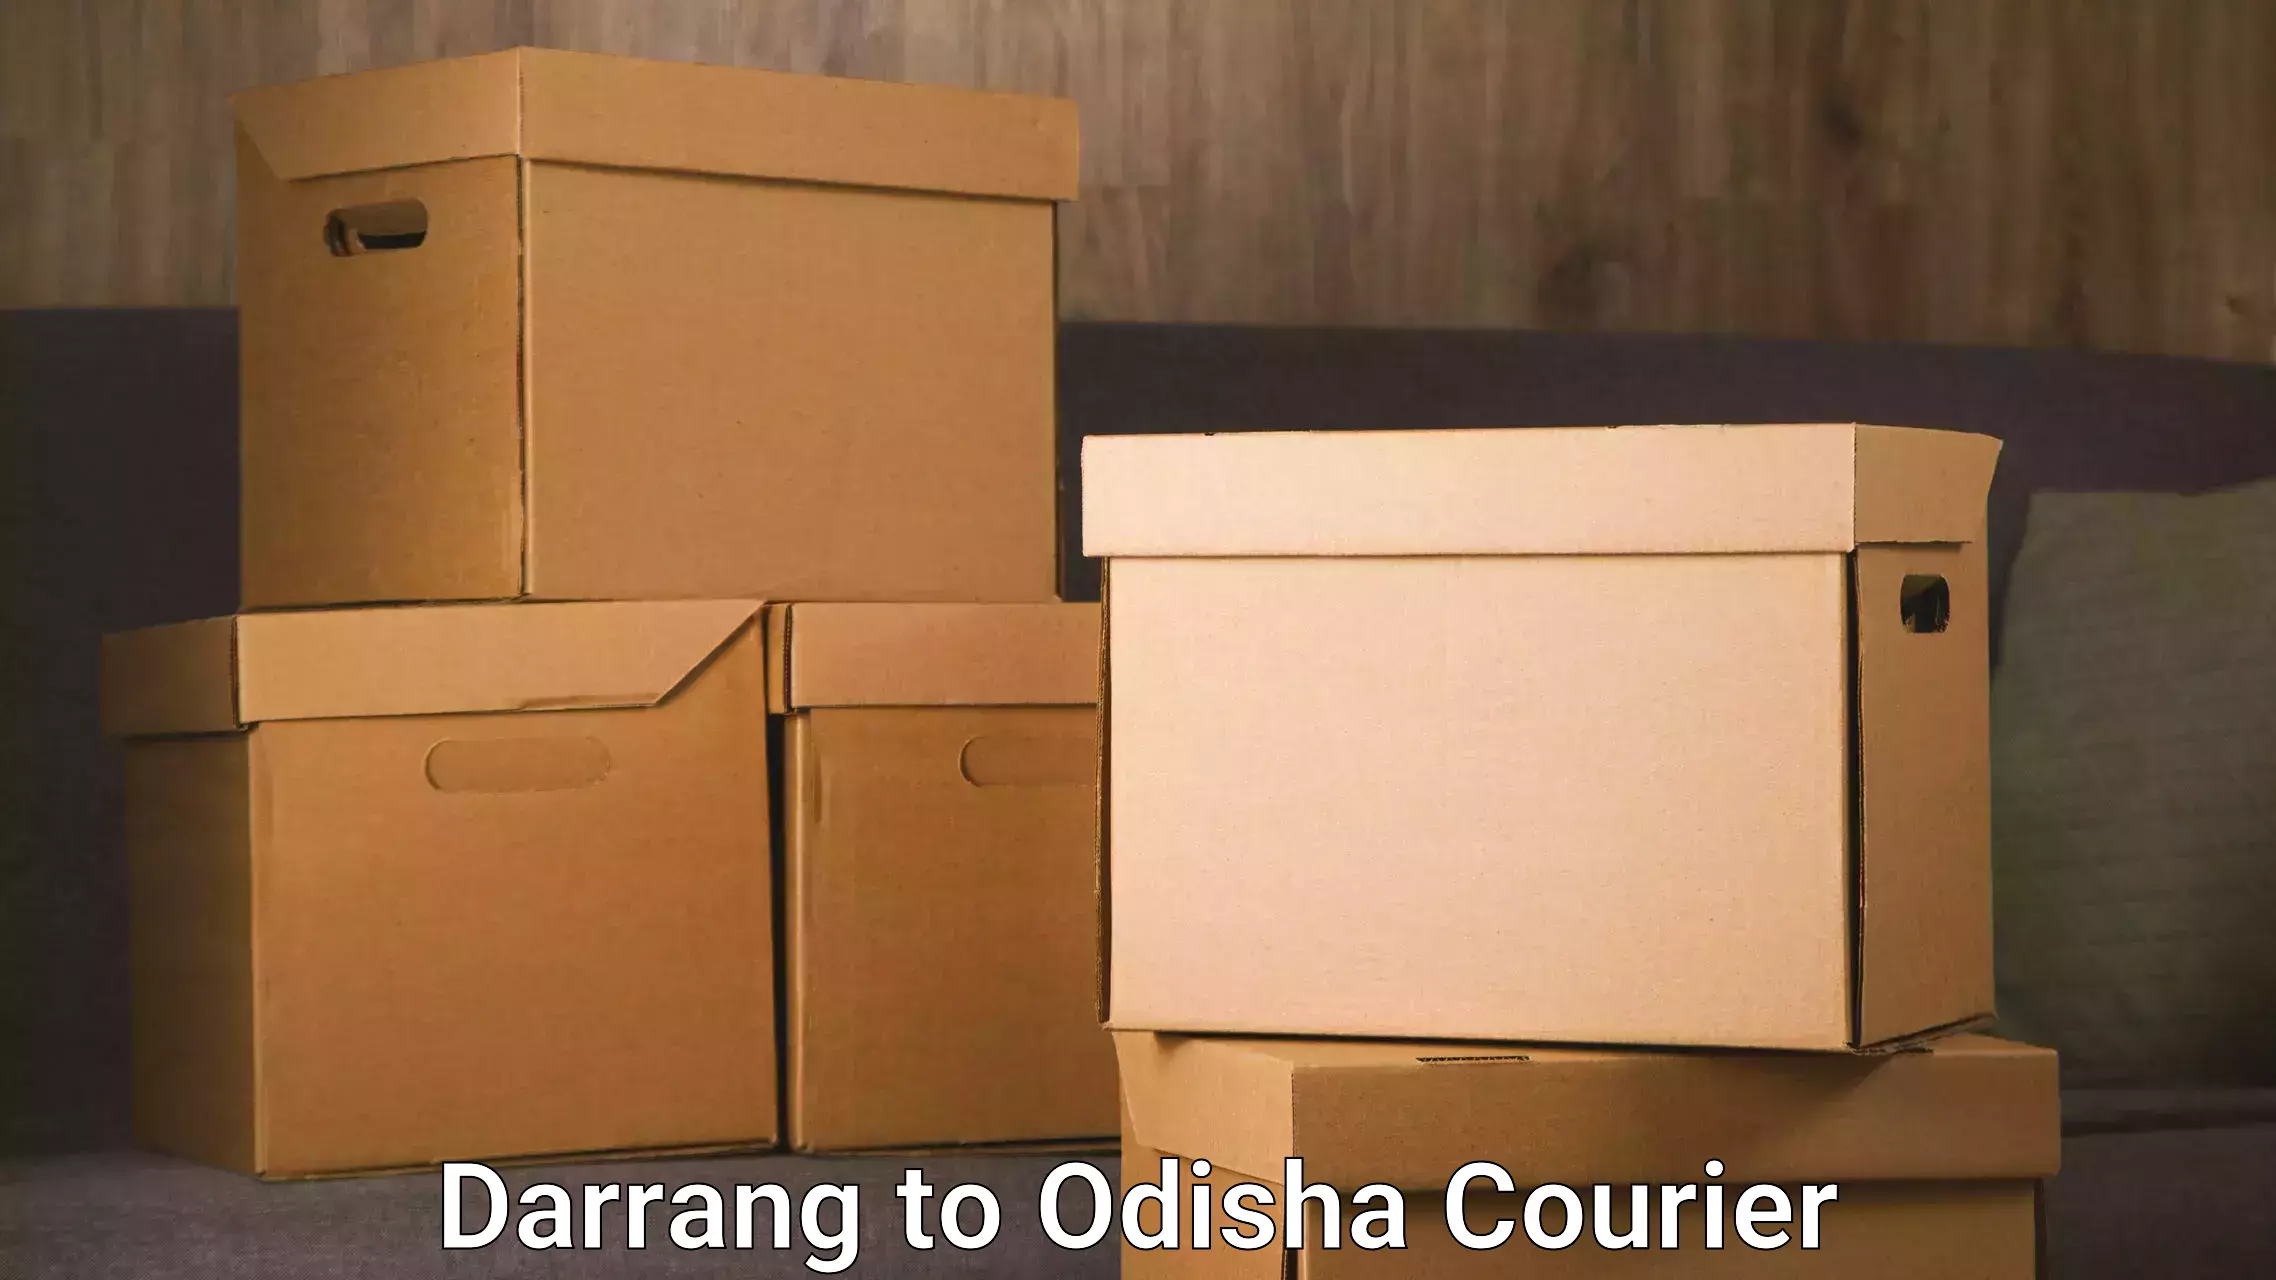 End-to-end delivery in Darrang to Kandhamal